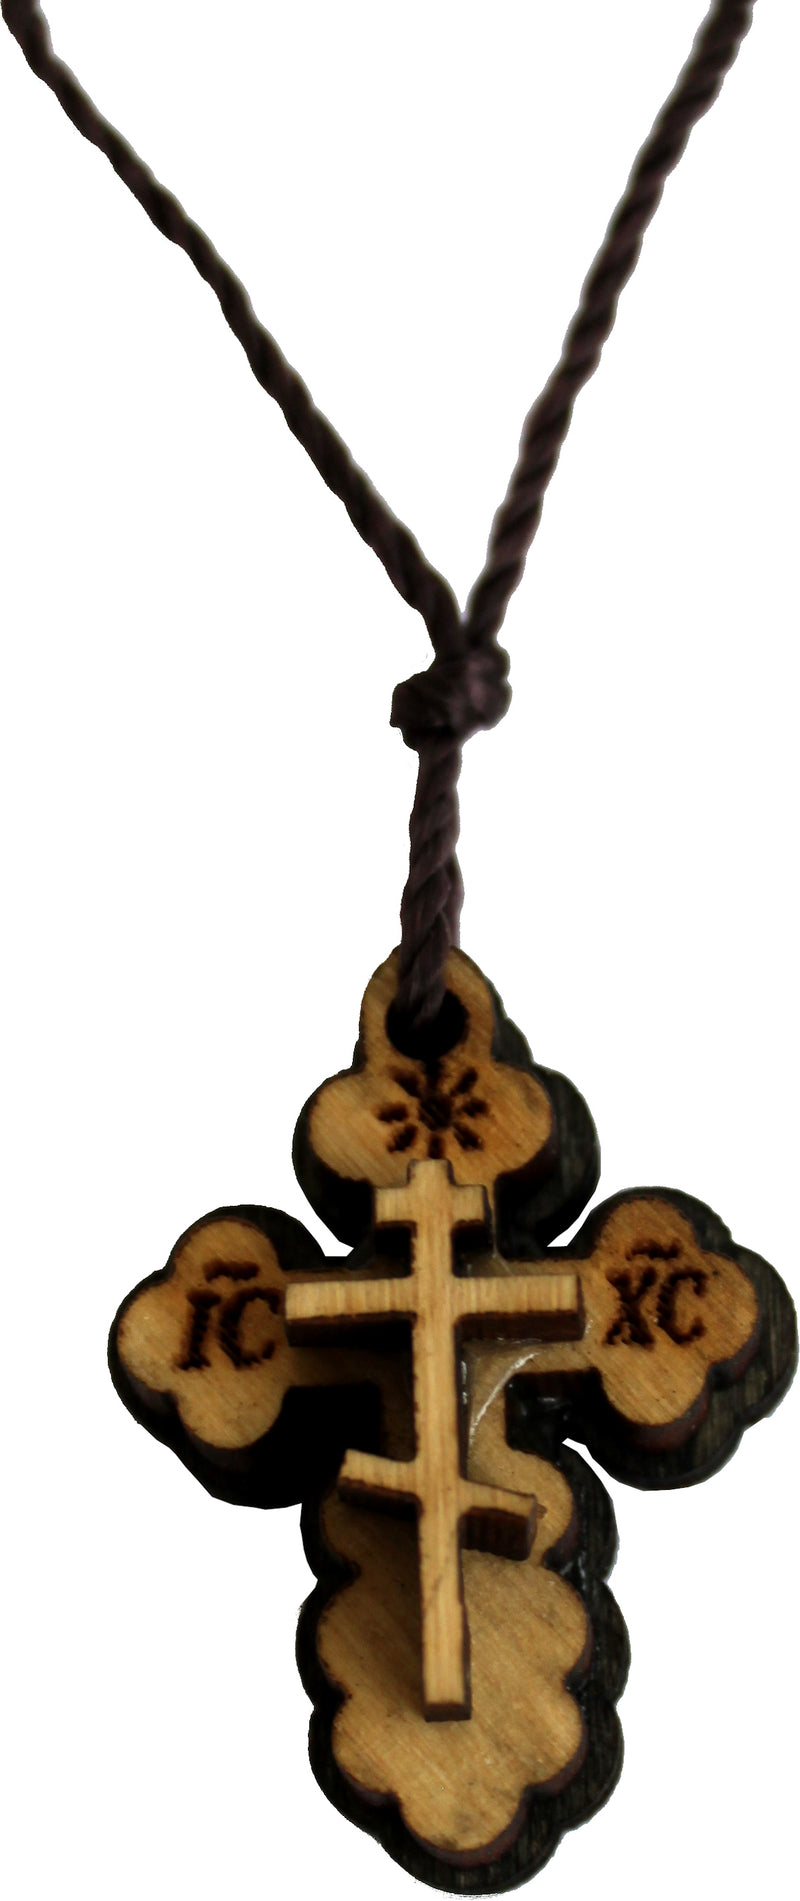 Eastern or Orthodox olive wood Cross necklace